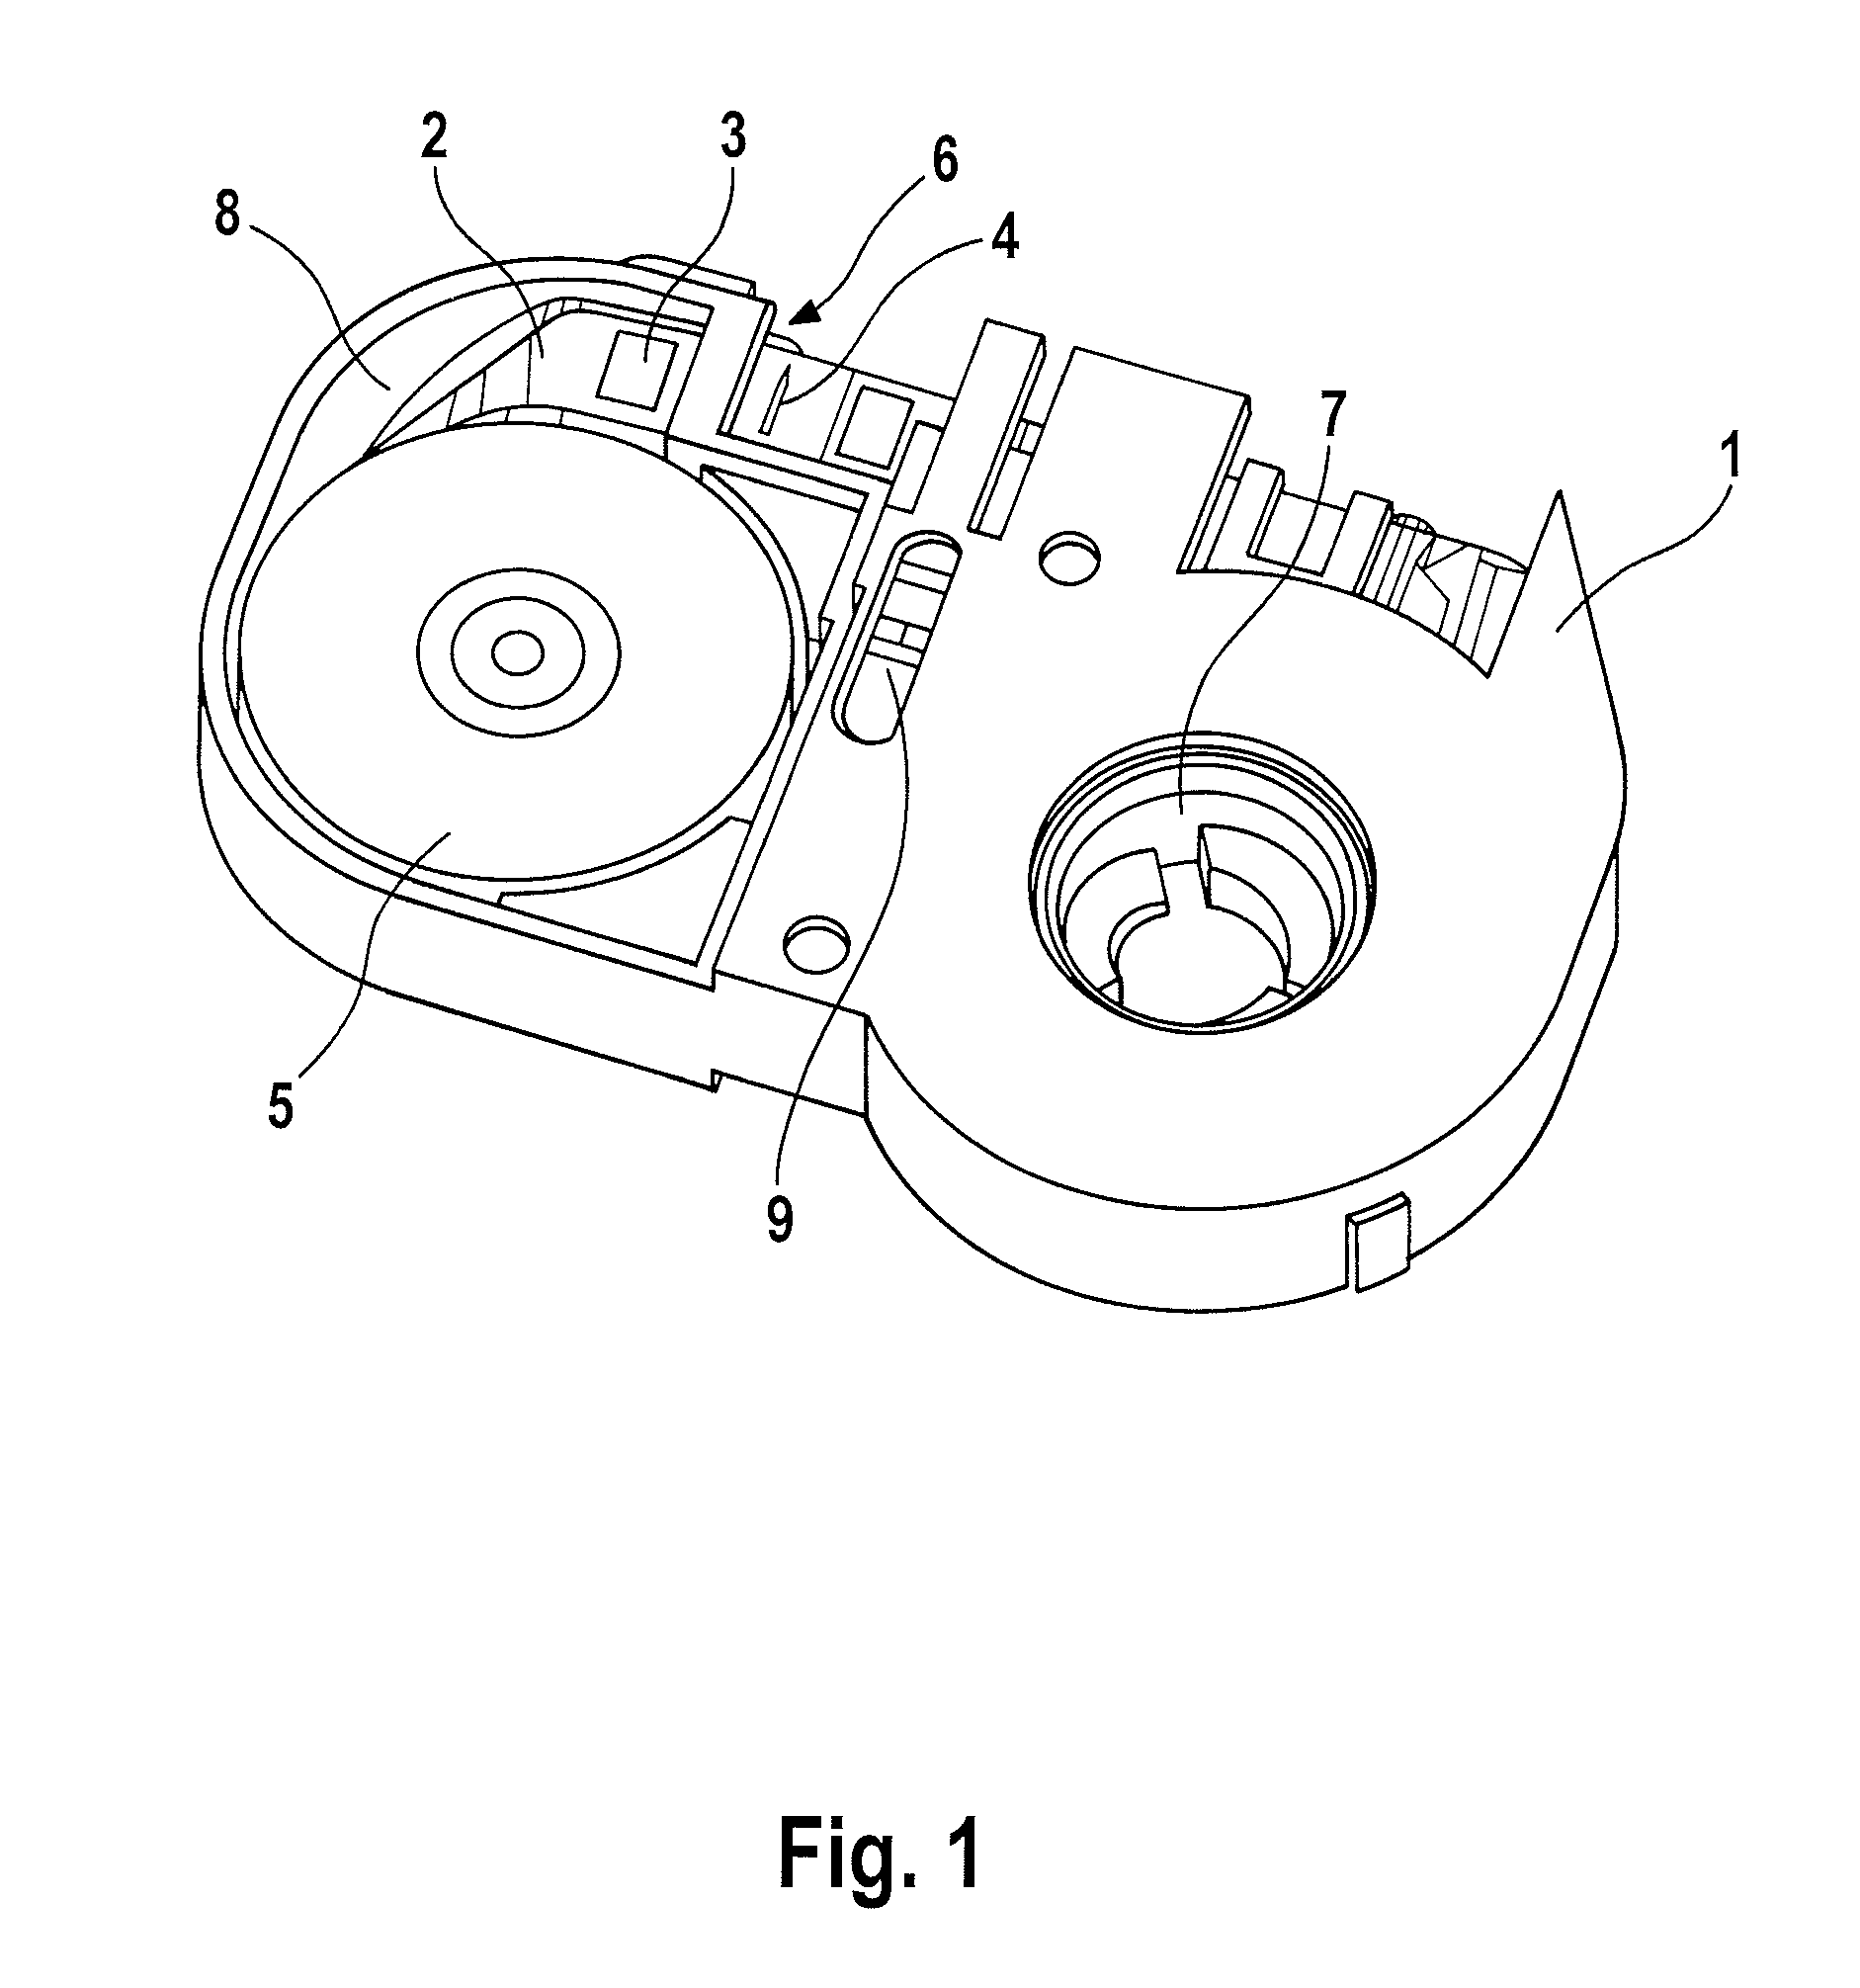 Tape cassette for a medical handheld device